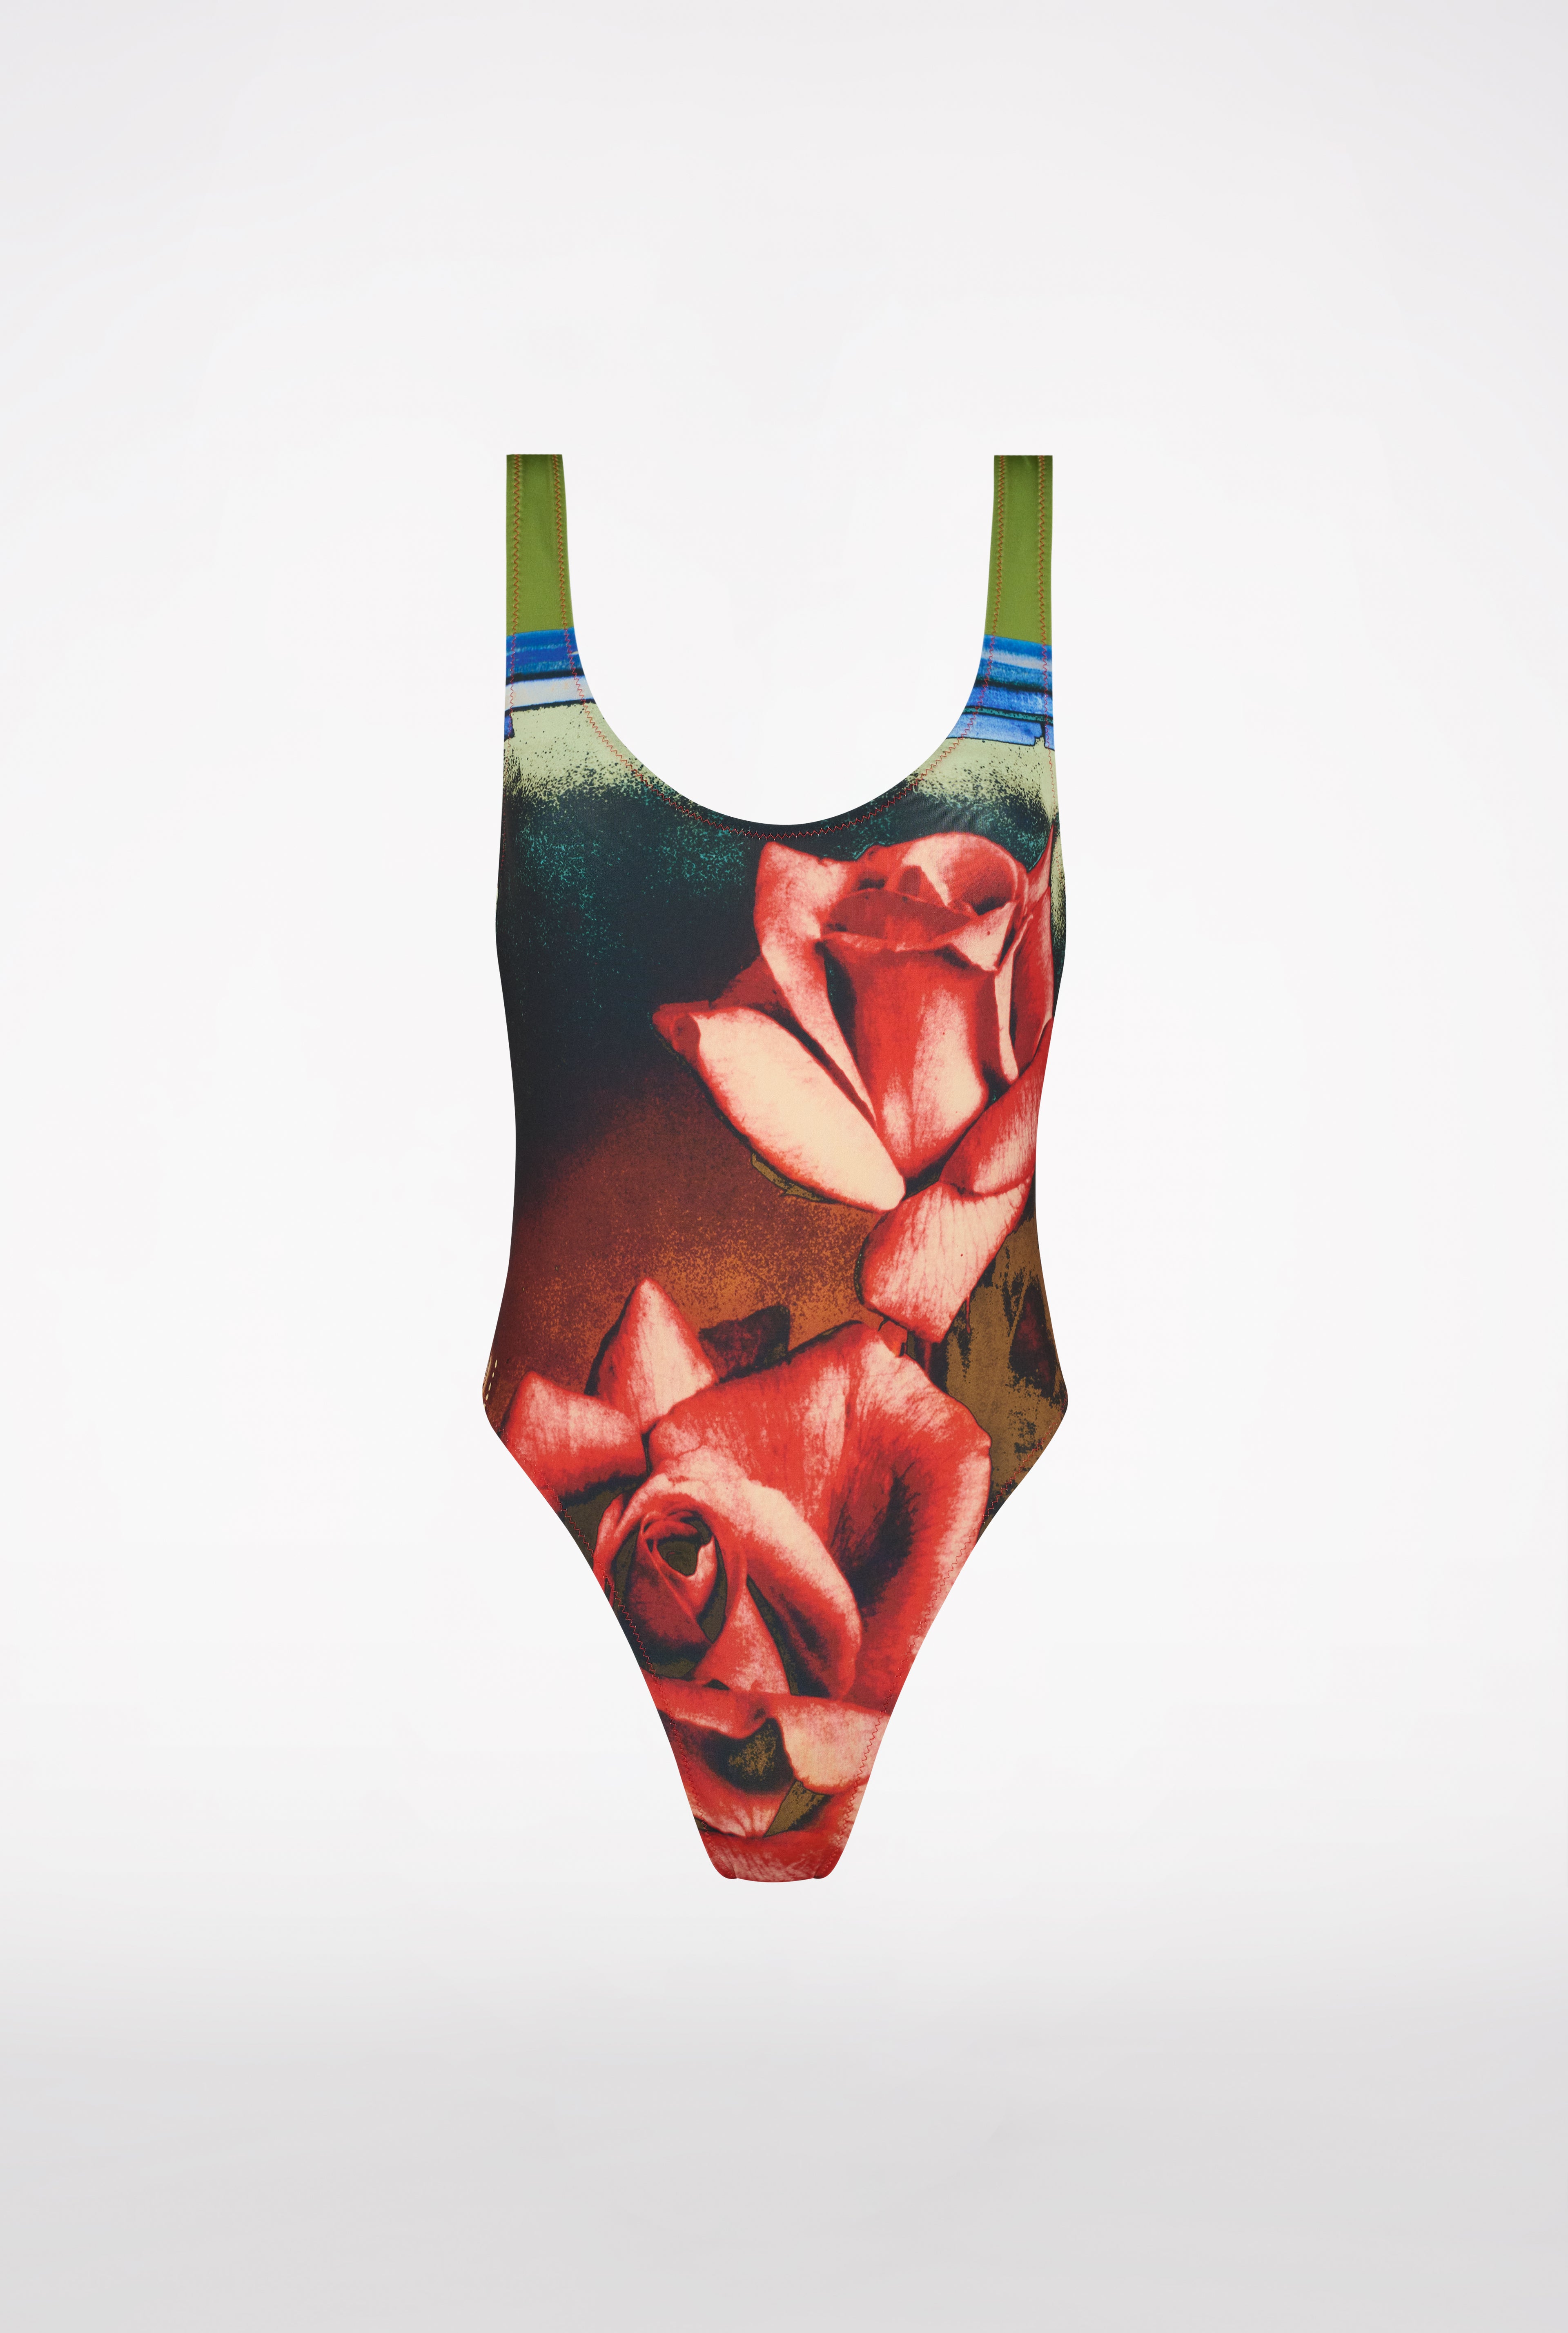 The Red Roses Swimsuit